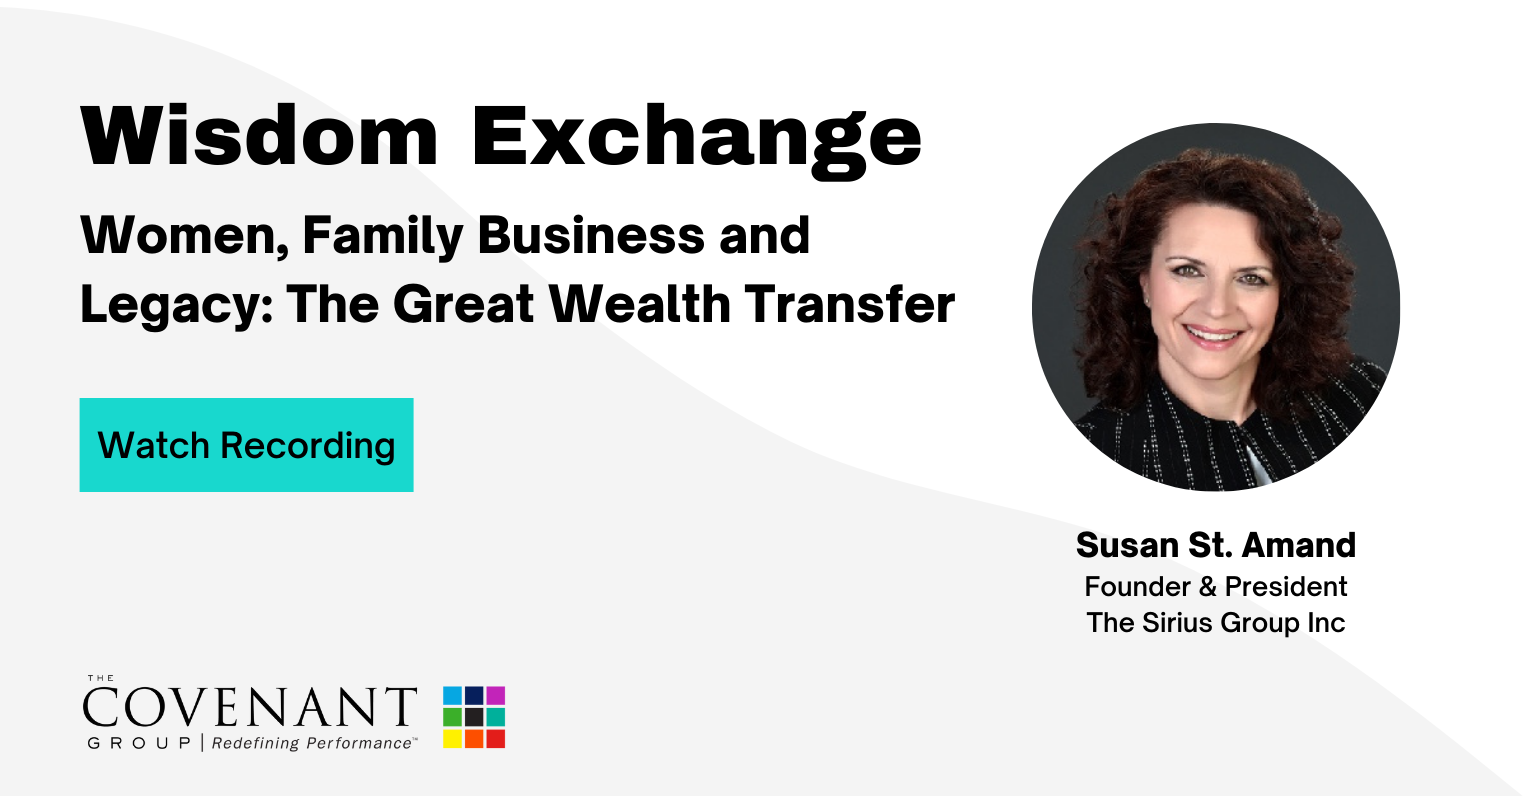 Women, Family Business and Legacy: The Great Wealth Transfer